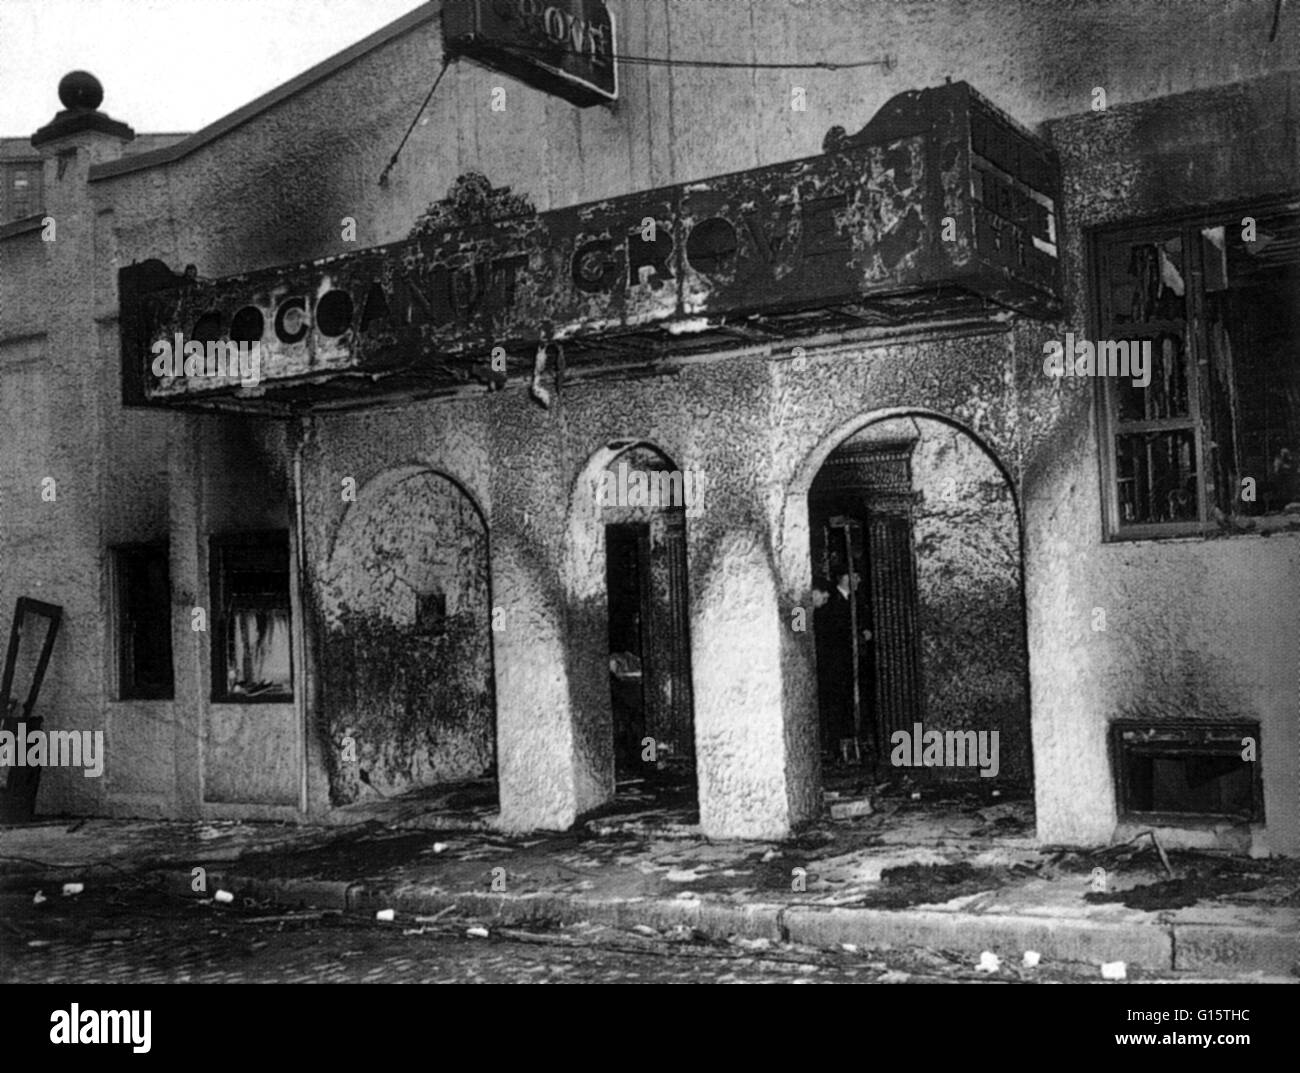 On November 28th 1942, a deadly fire occurred at the Cocoanut Grove Nightclub in Boston, Massachusetts, where 492 people perished in total. The Cocoanut Grove was originally a speakeasy, an illegal bar during alcohol Prohibition, and some of its doors wer Stock Photo